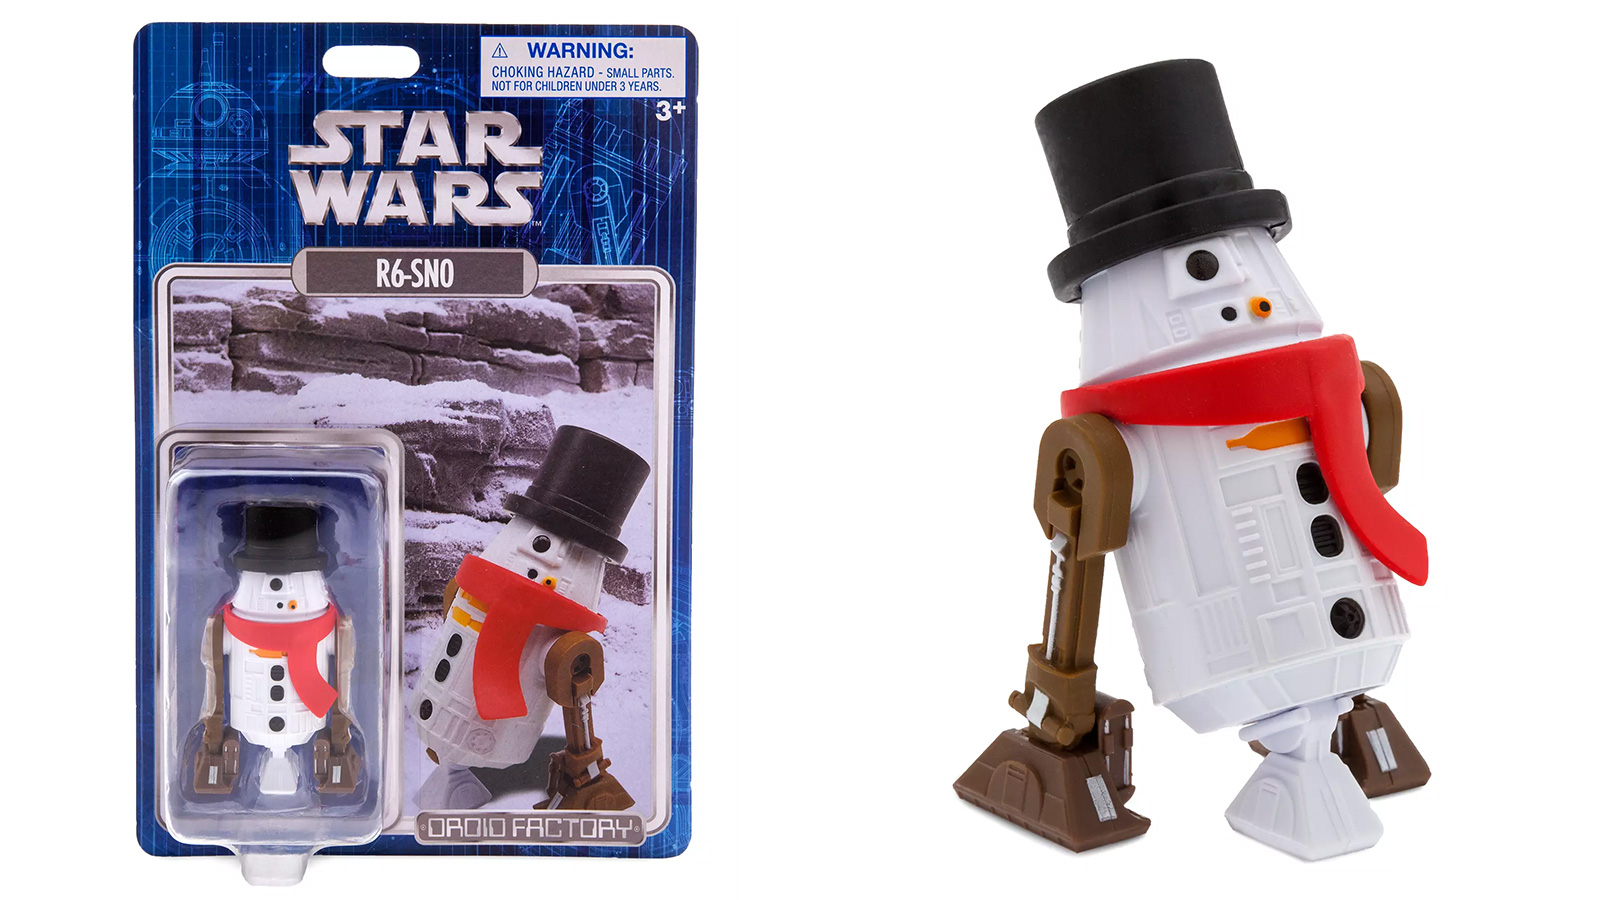 In Stock At Shop Disney - Exclusive Droid Factory R6-SN0 Christmas Droid